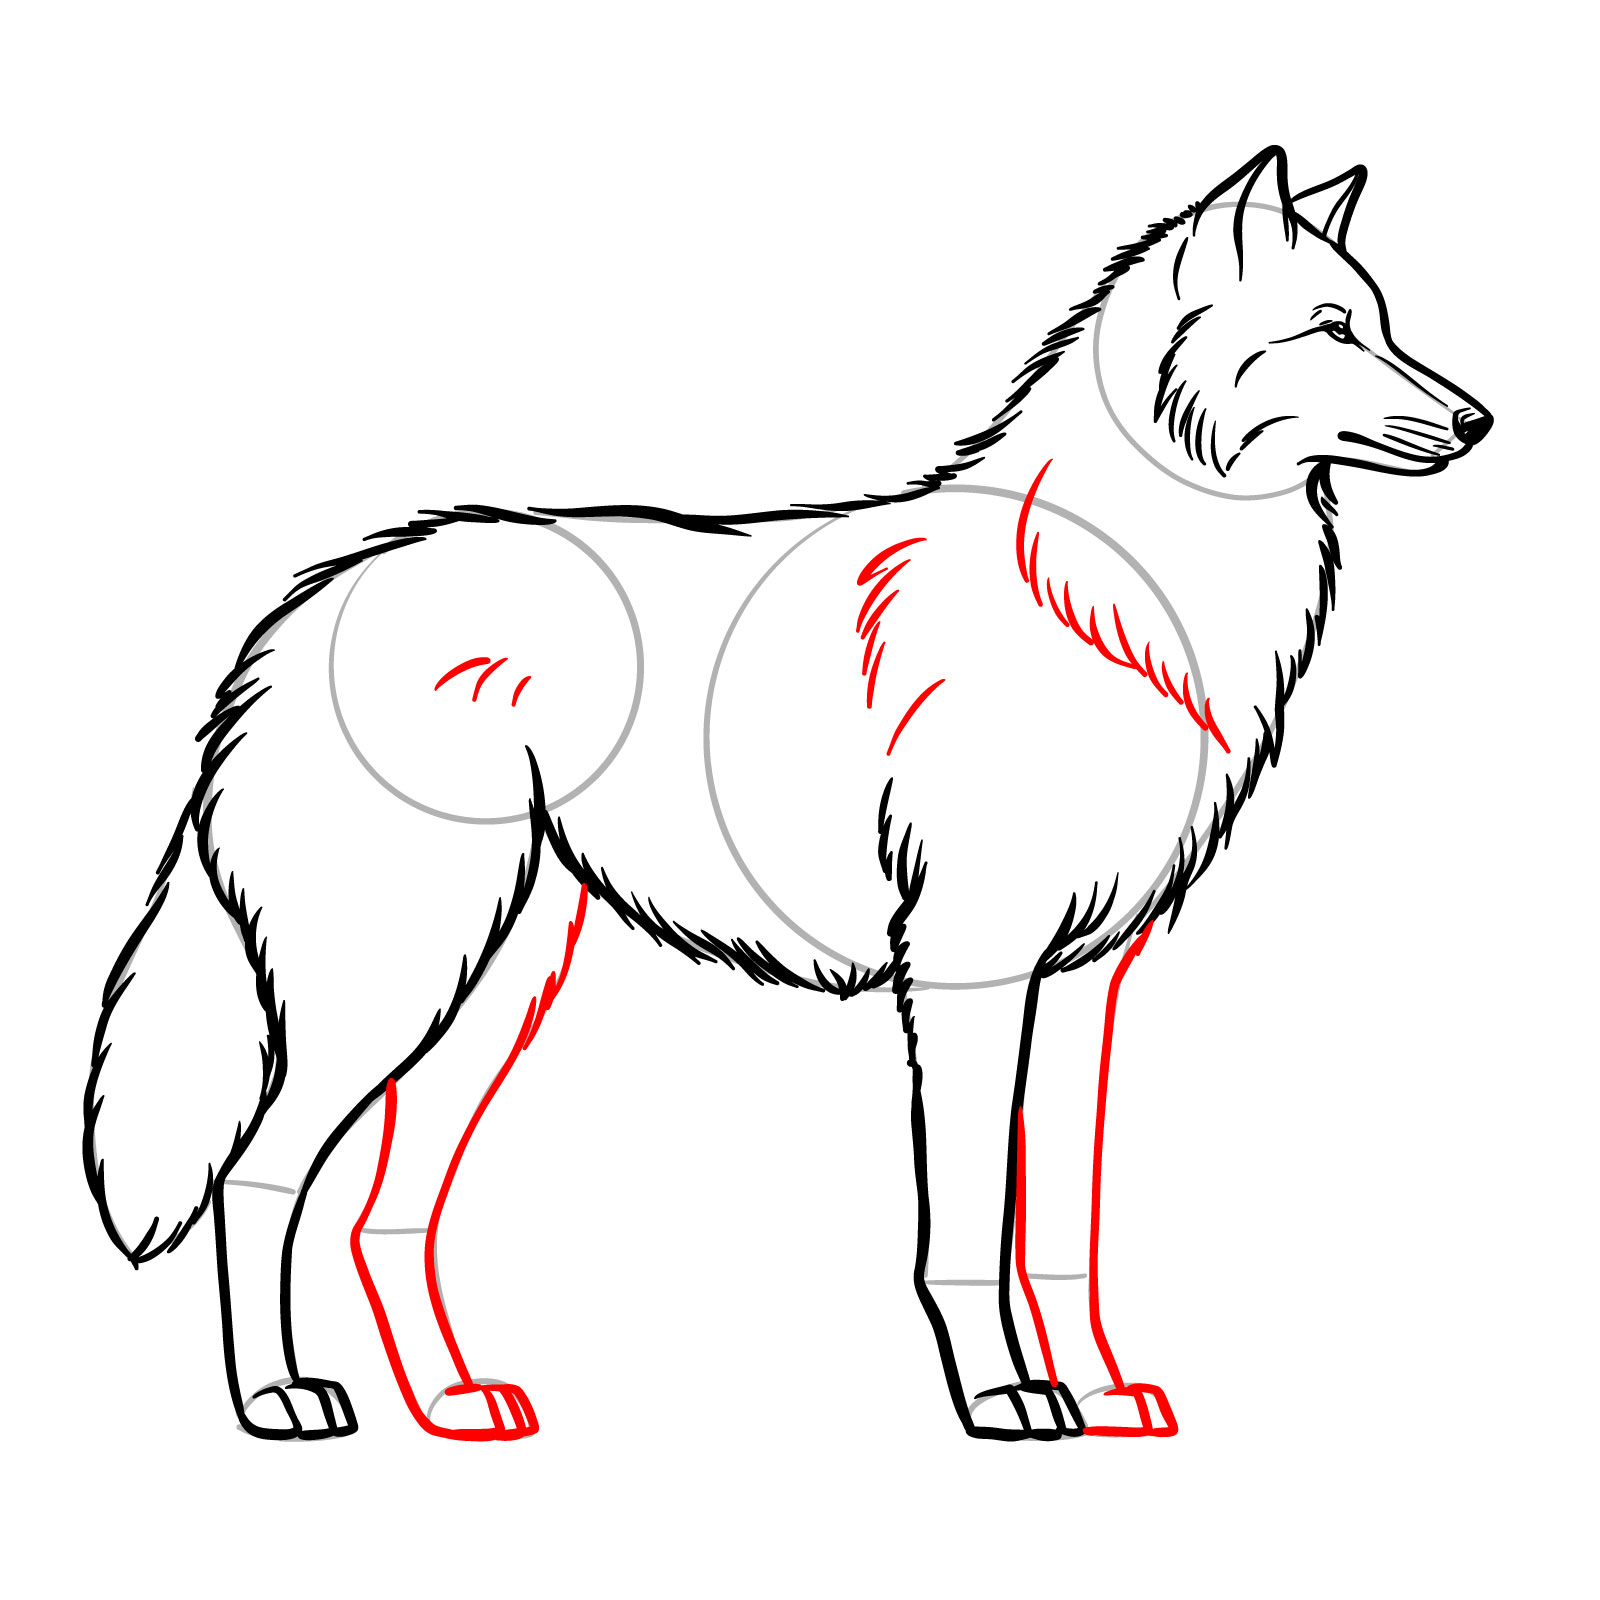 Finalizing the wolf's legs and adding fur texture in a side view drawing - step 12